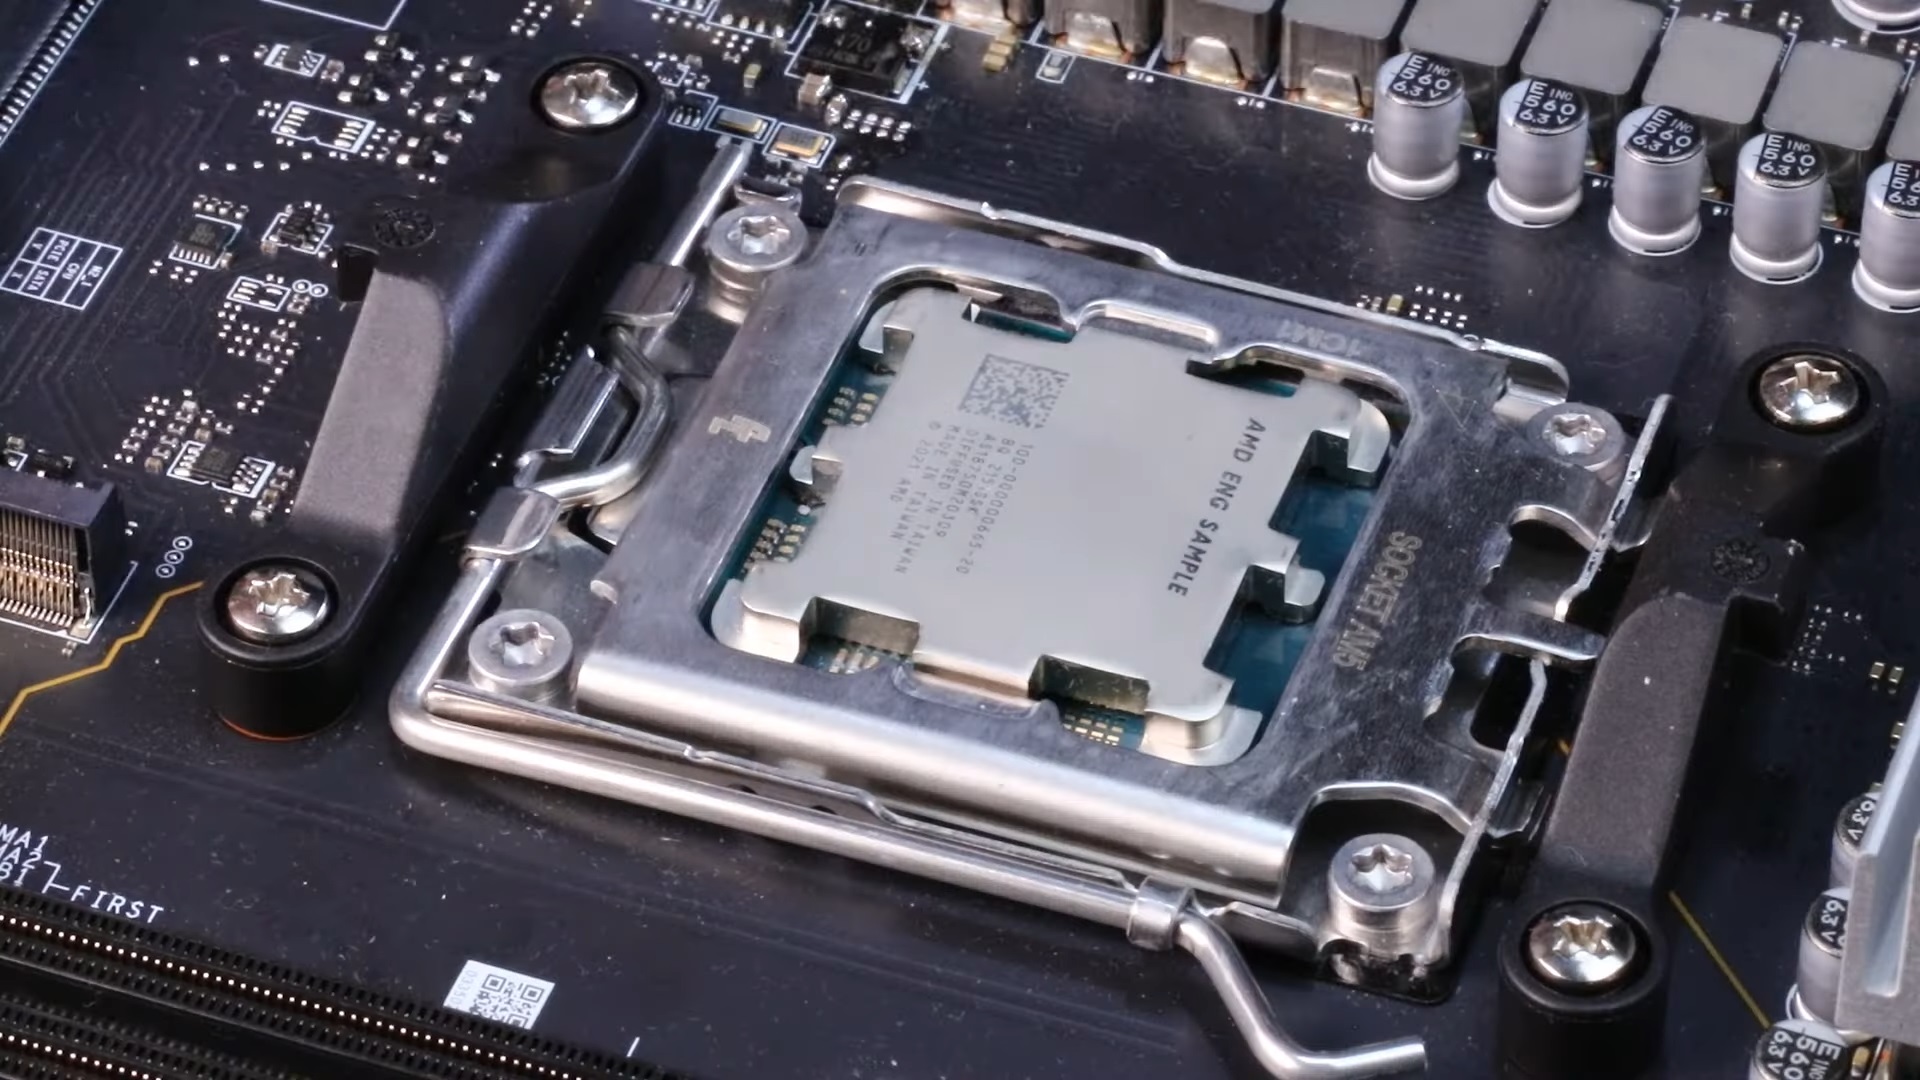 Media asset in full size related to 3dfxzone.it news item entitled as follows: Foto leaked di un sample engineering di una CPU AMD socket AM5 Ryzen 7000 | Image Name: news33313_AMD-Ryzen-7000-Sample-Engineering_1.jpg